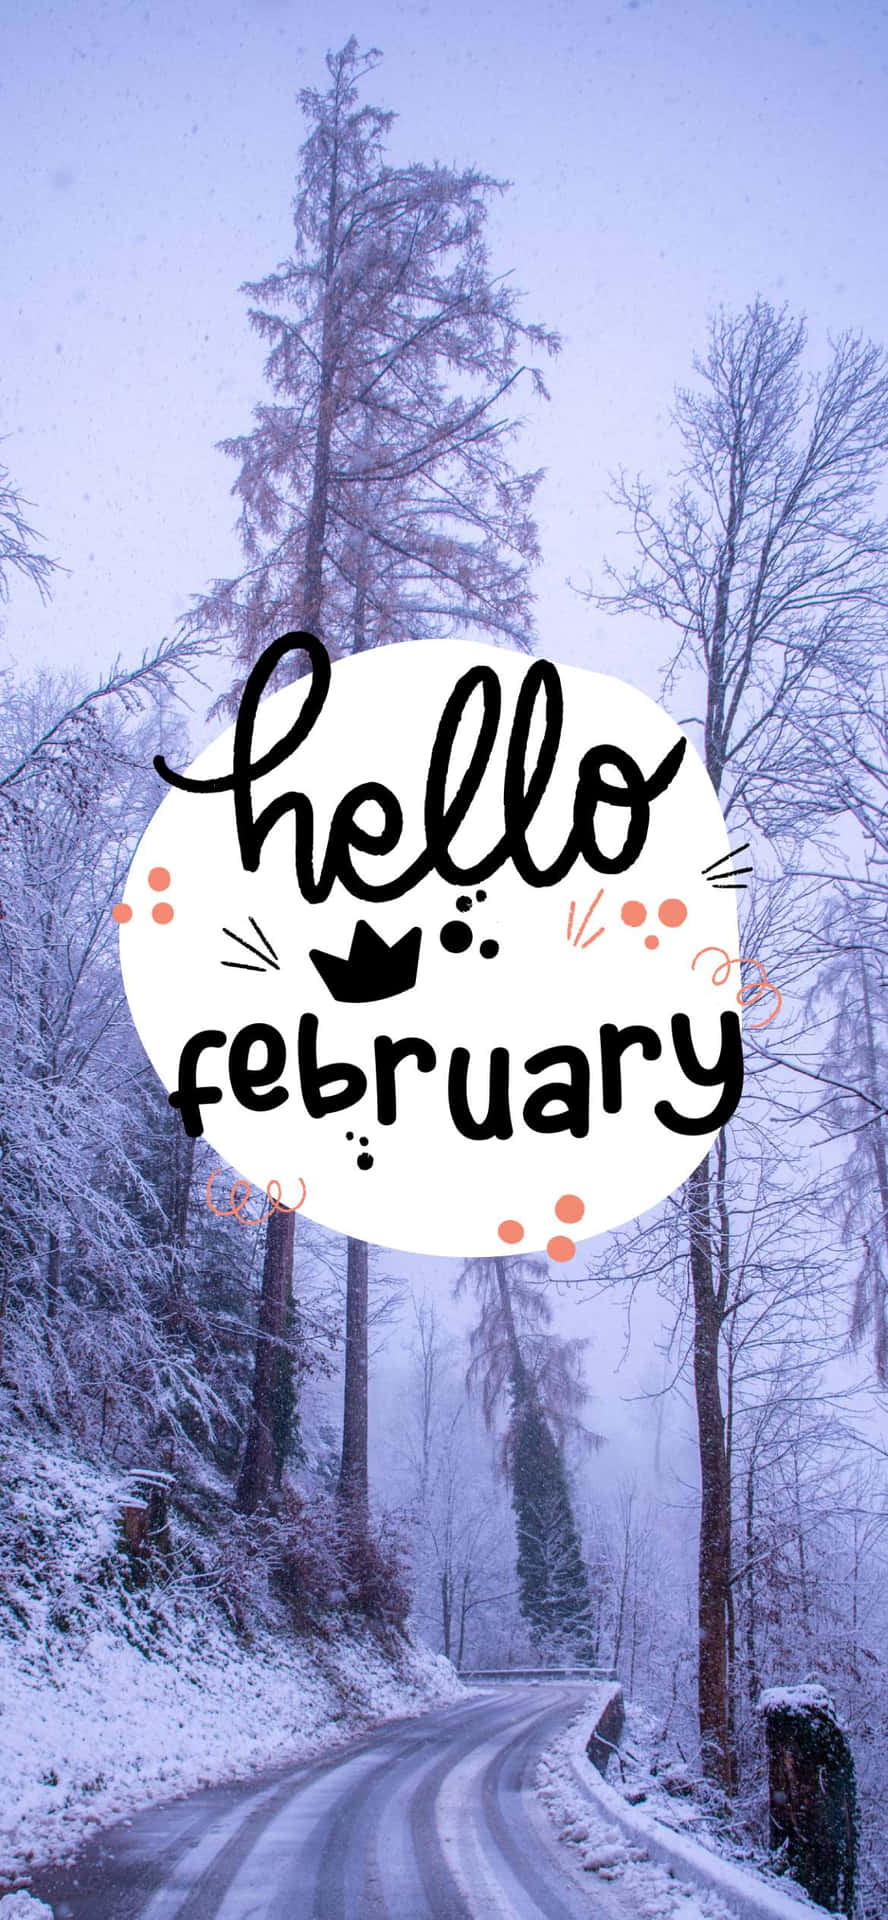 Welcome to February! Wallpaper